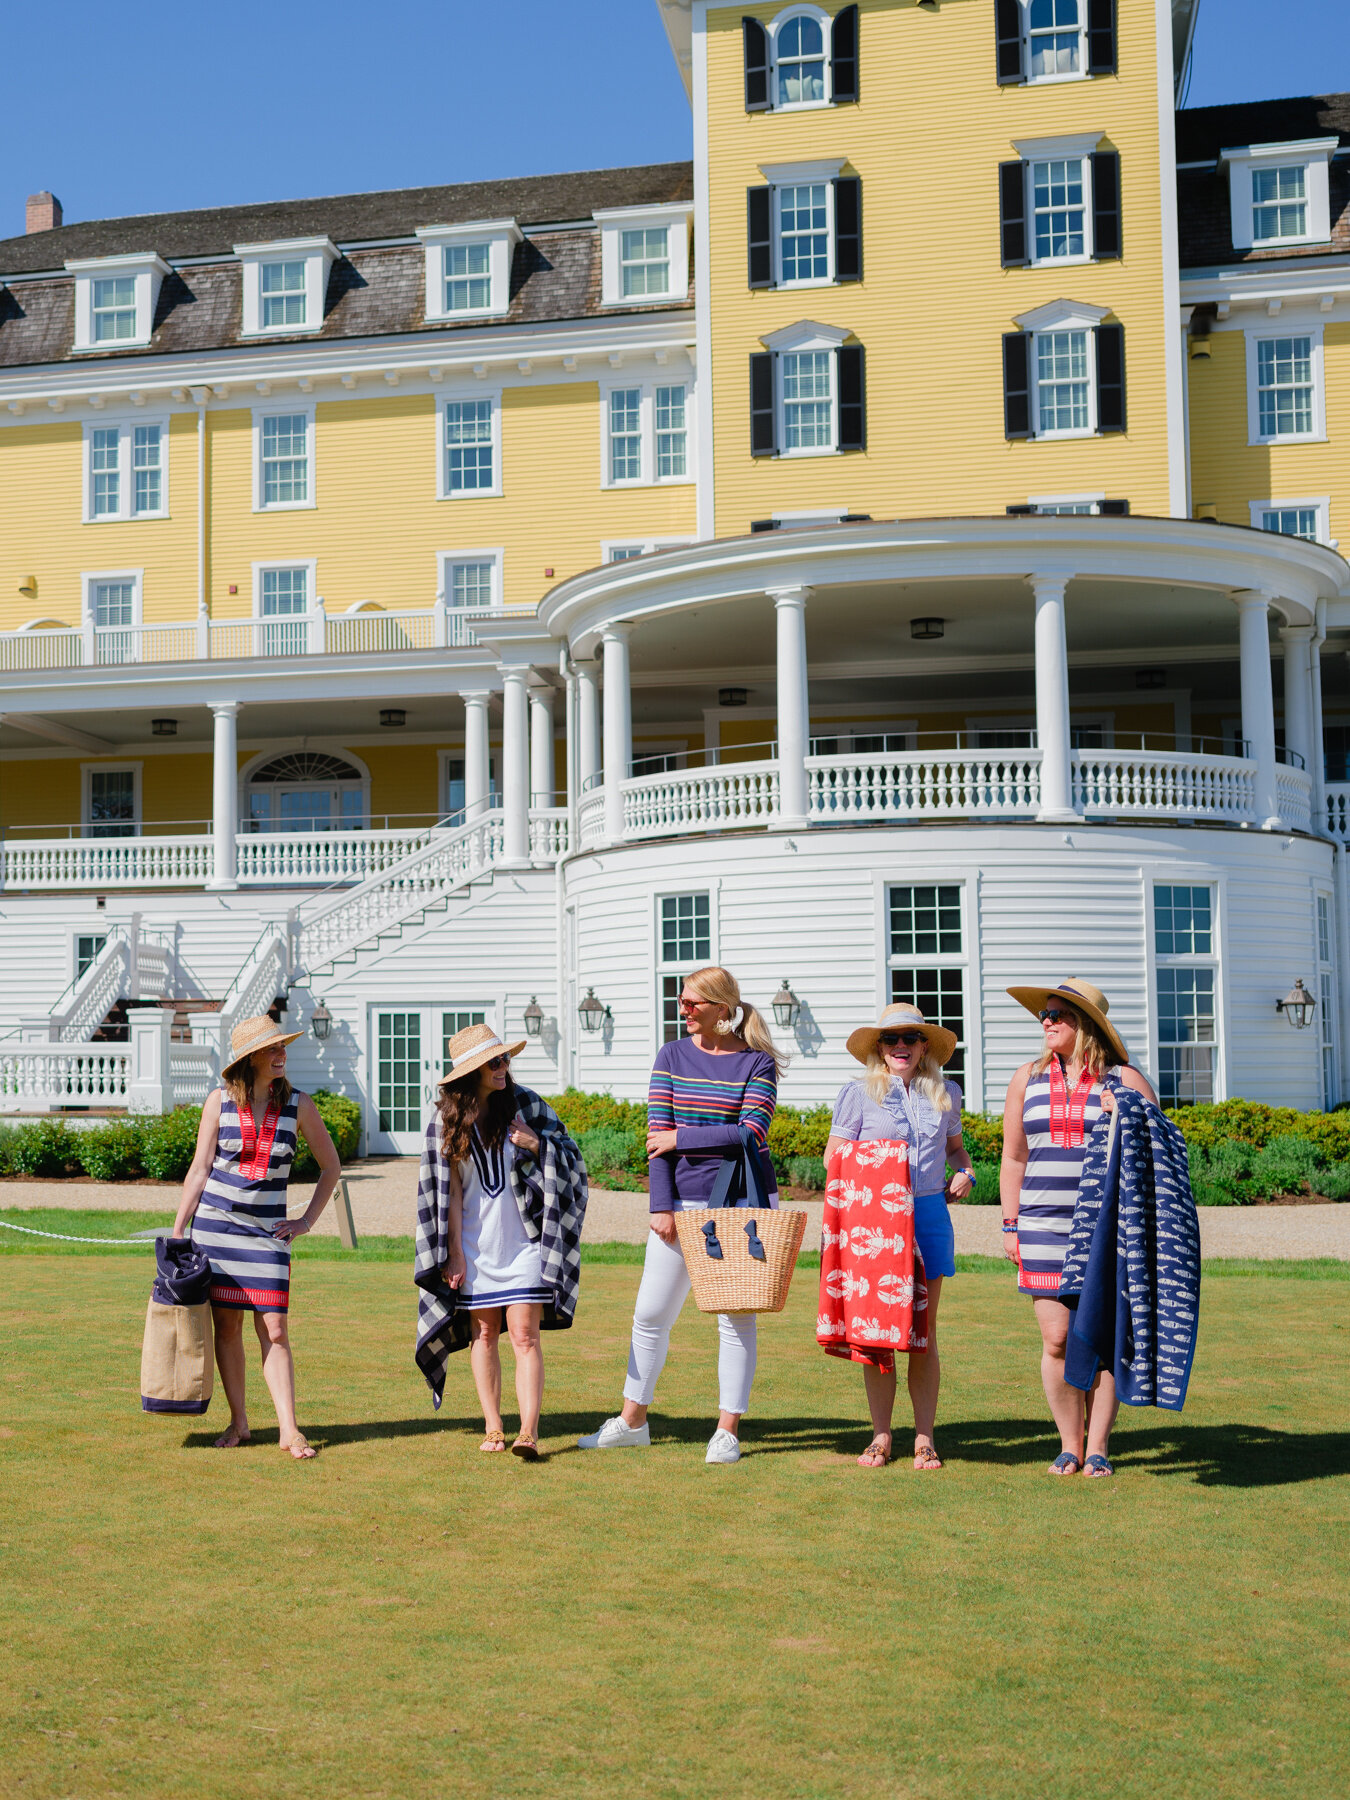 From left to right: Claire, Caitlin, Kristy, Nina, &amp; JenOn Claire &amp; Jen: Red and White Striped Dress: Shop Navy Bleu, On Caitlin: White and Navy Cover-up: Shop Navy Bleu, On Kristy: Multi-colored Striped Top: Shop Navy Bleu On Nina: Ruffled …